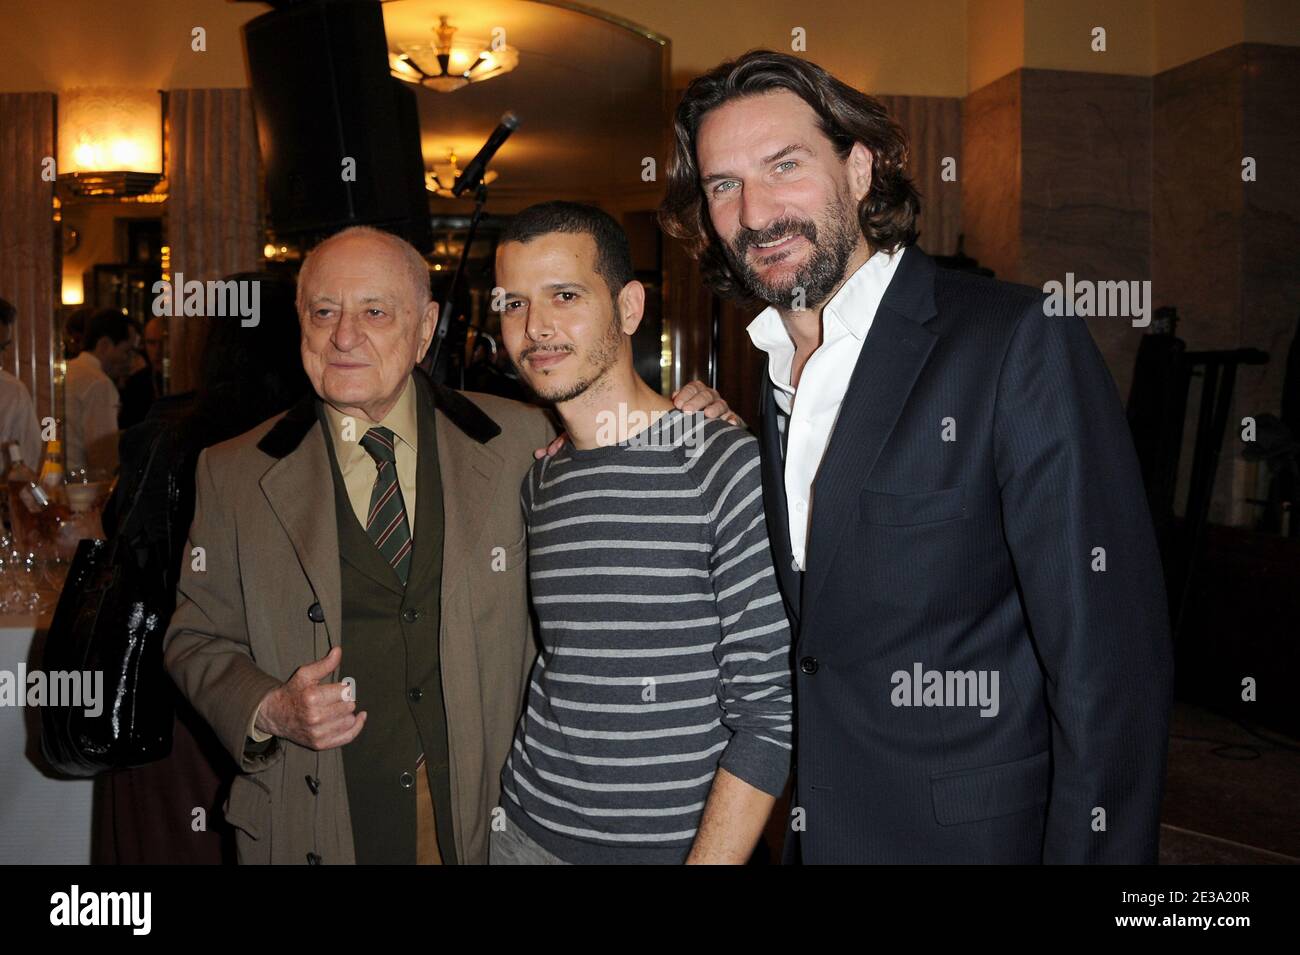 Pierre Berger, Abdellah Taia and Frederic Beigbeder attending the Flore literary prize 2010 at the 'Cafe de Flore' in Paris, France on November 4, 2010. Photo by Nicolas Briquet/ABACAPRESS.COM Stock Photo